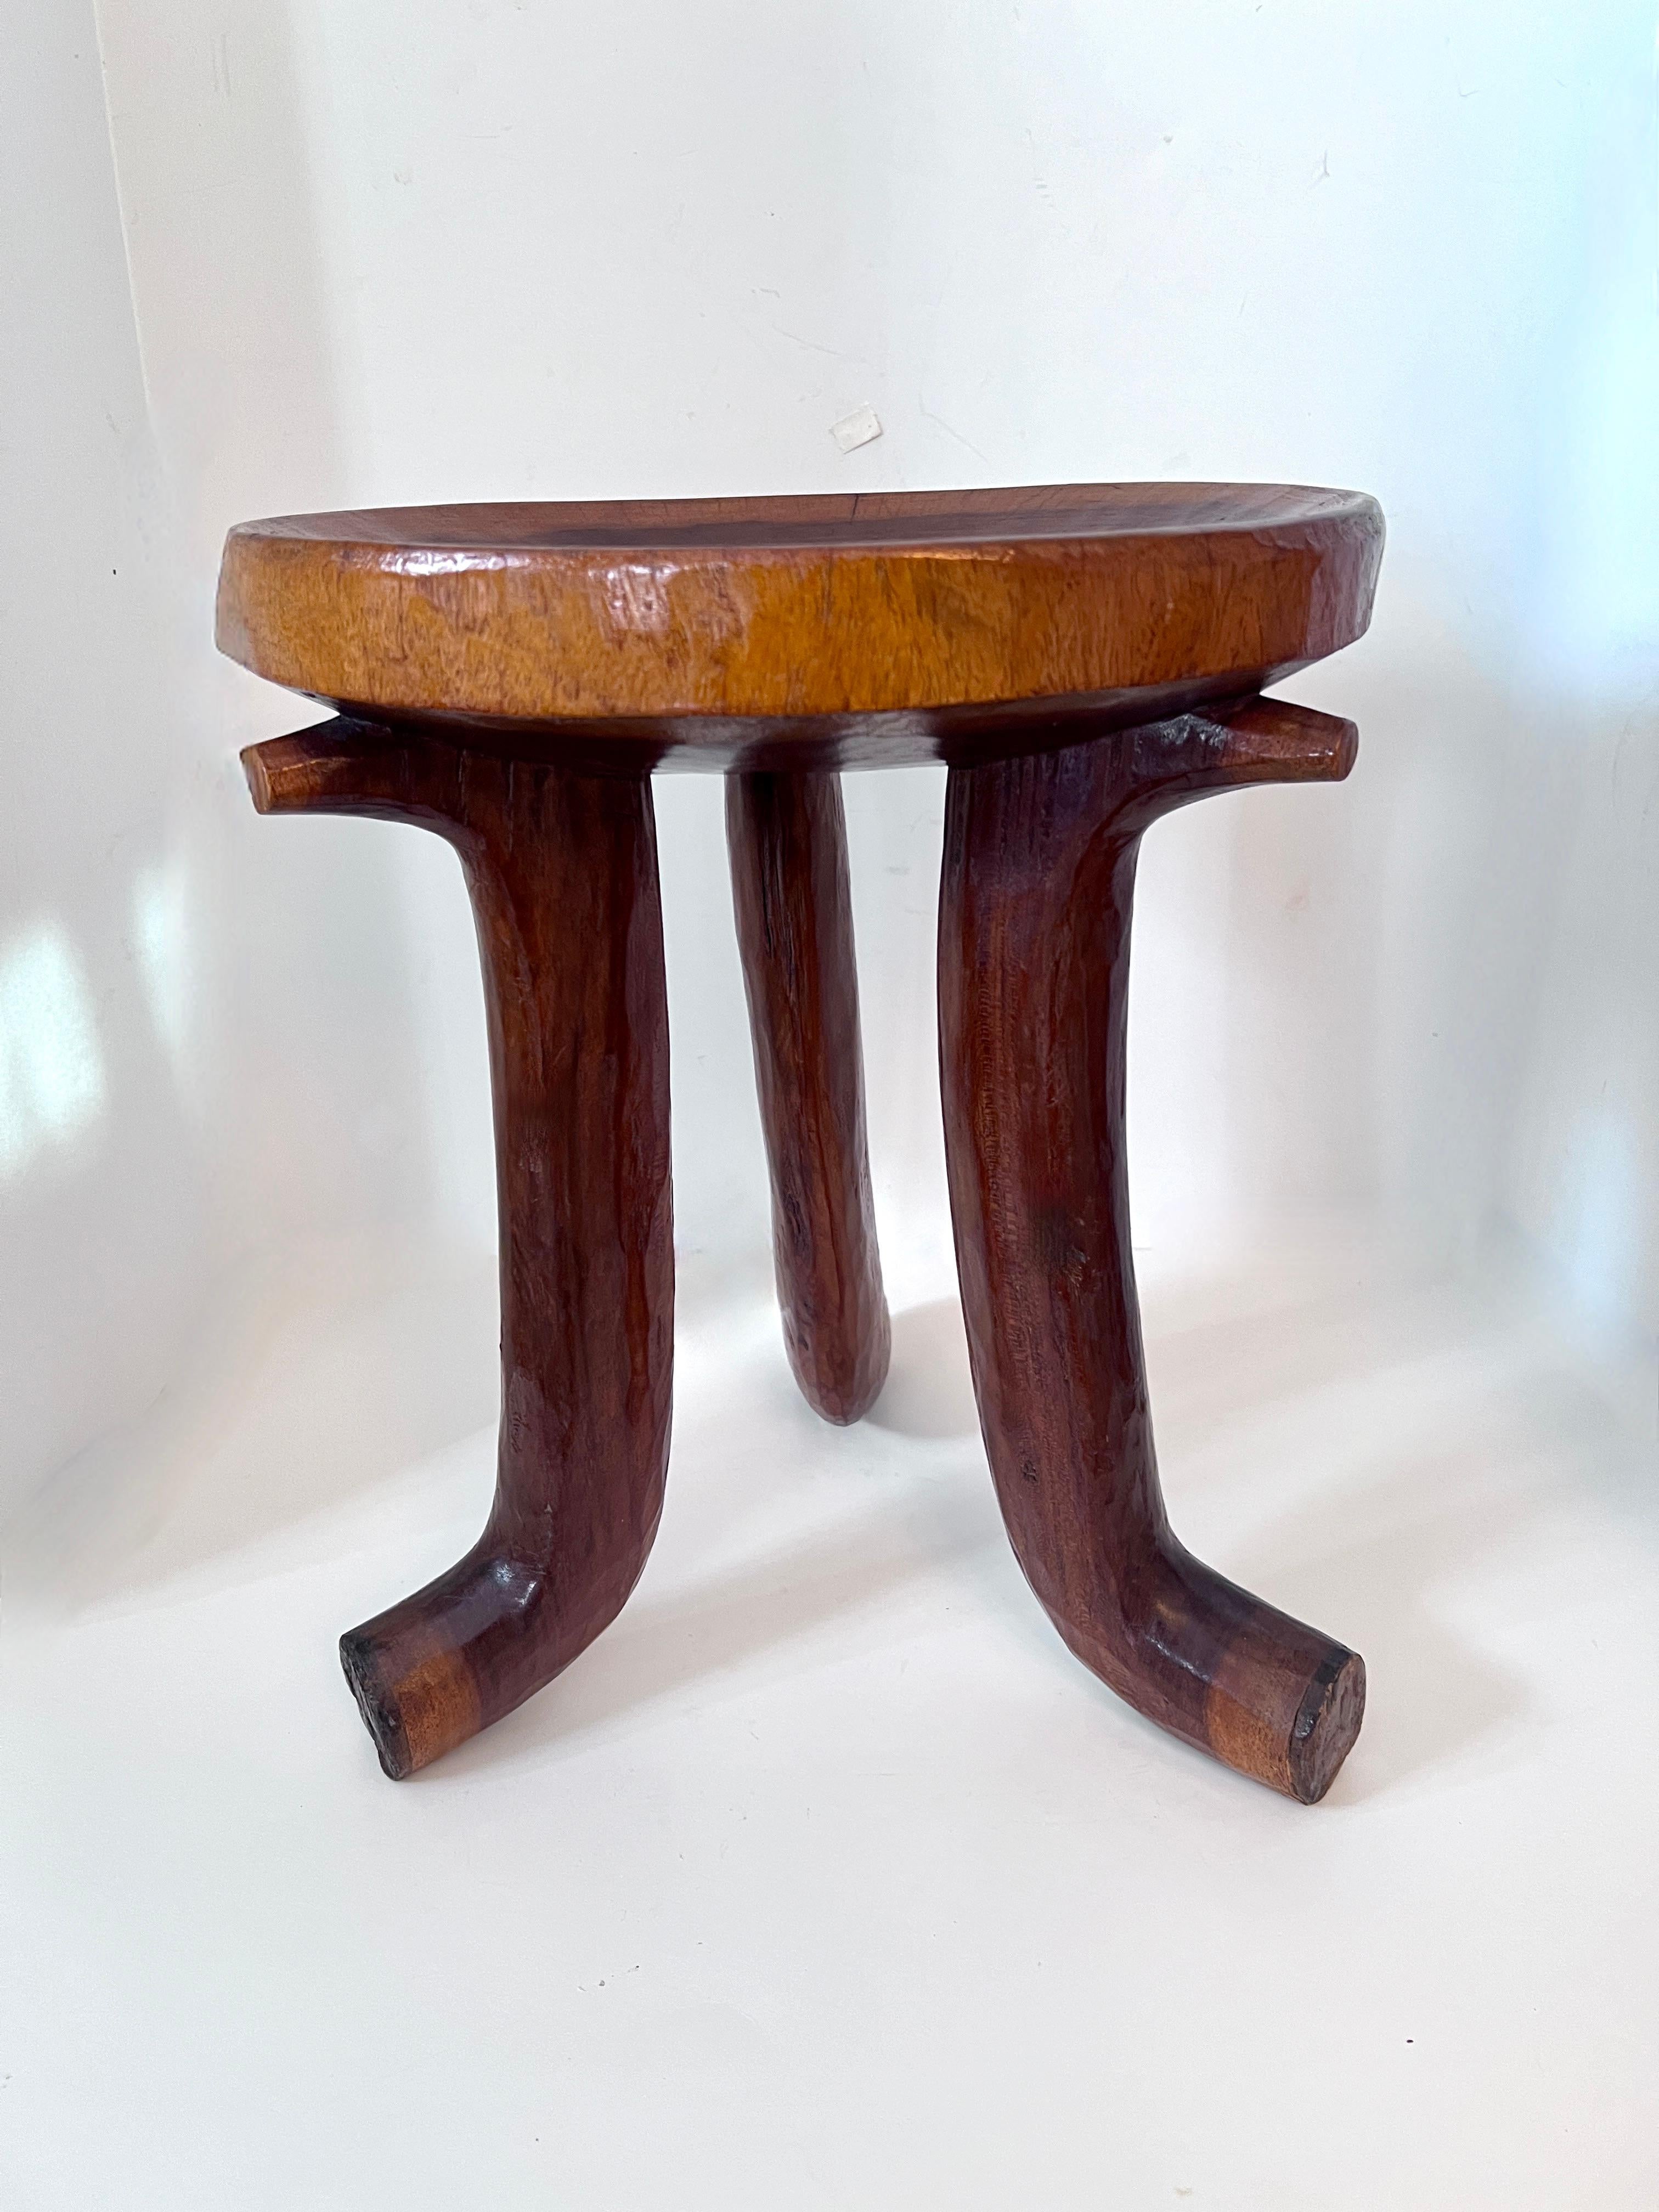 An African, Ethiopian three leg table or Oromo stool.  The solid wood piece is a compliment and unique style stool or side table.  The stool, in it's original state was for the elders to sit, in todays setting it adds a sense of organic